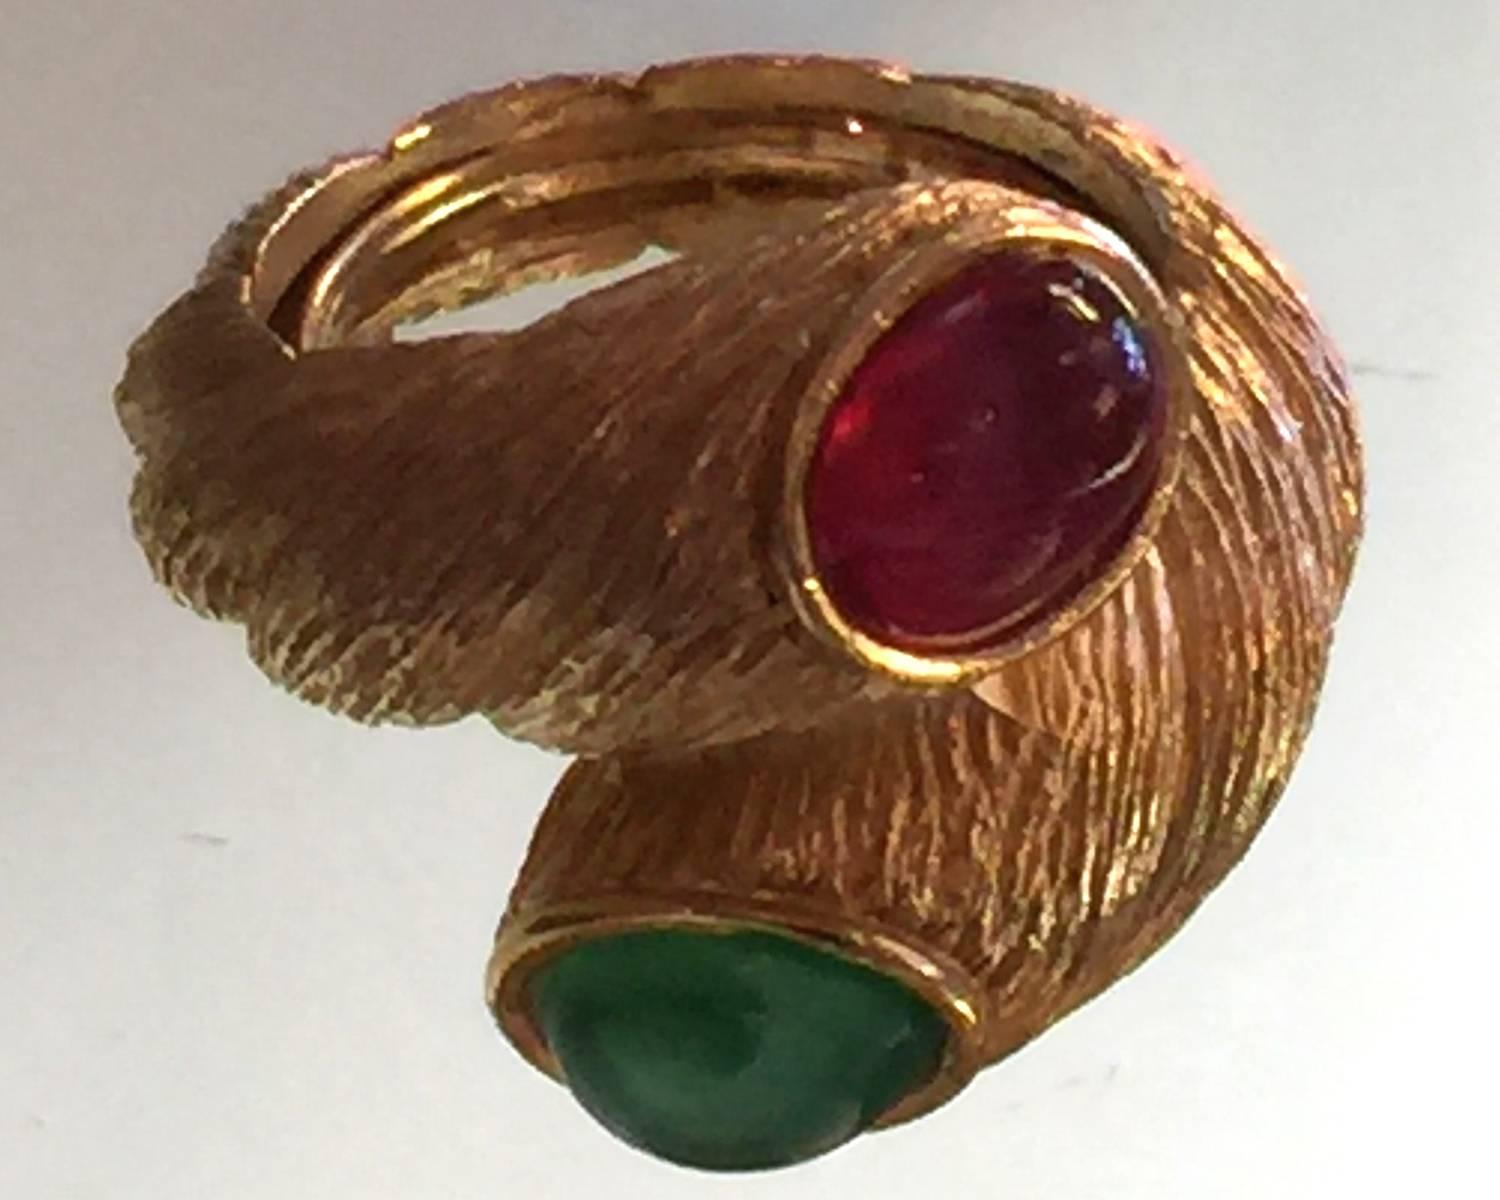 Women's 1960s TRIFARI Brushed Goldtone Fashion Dinner Ring  Faux Emerald Ruby Cabochons